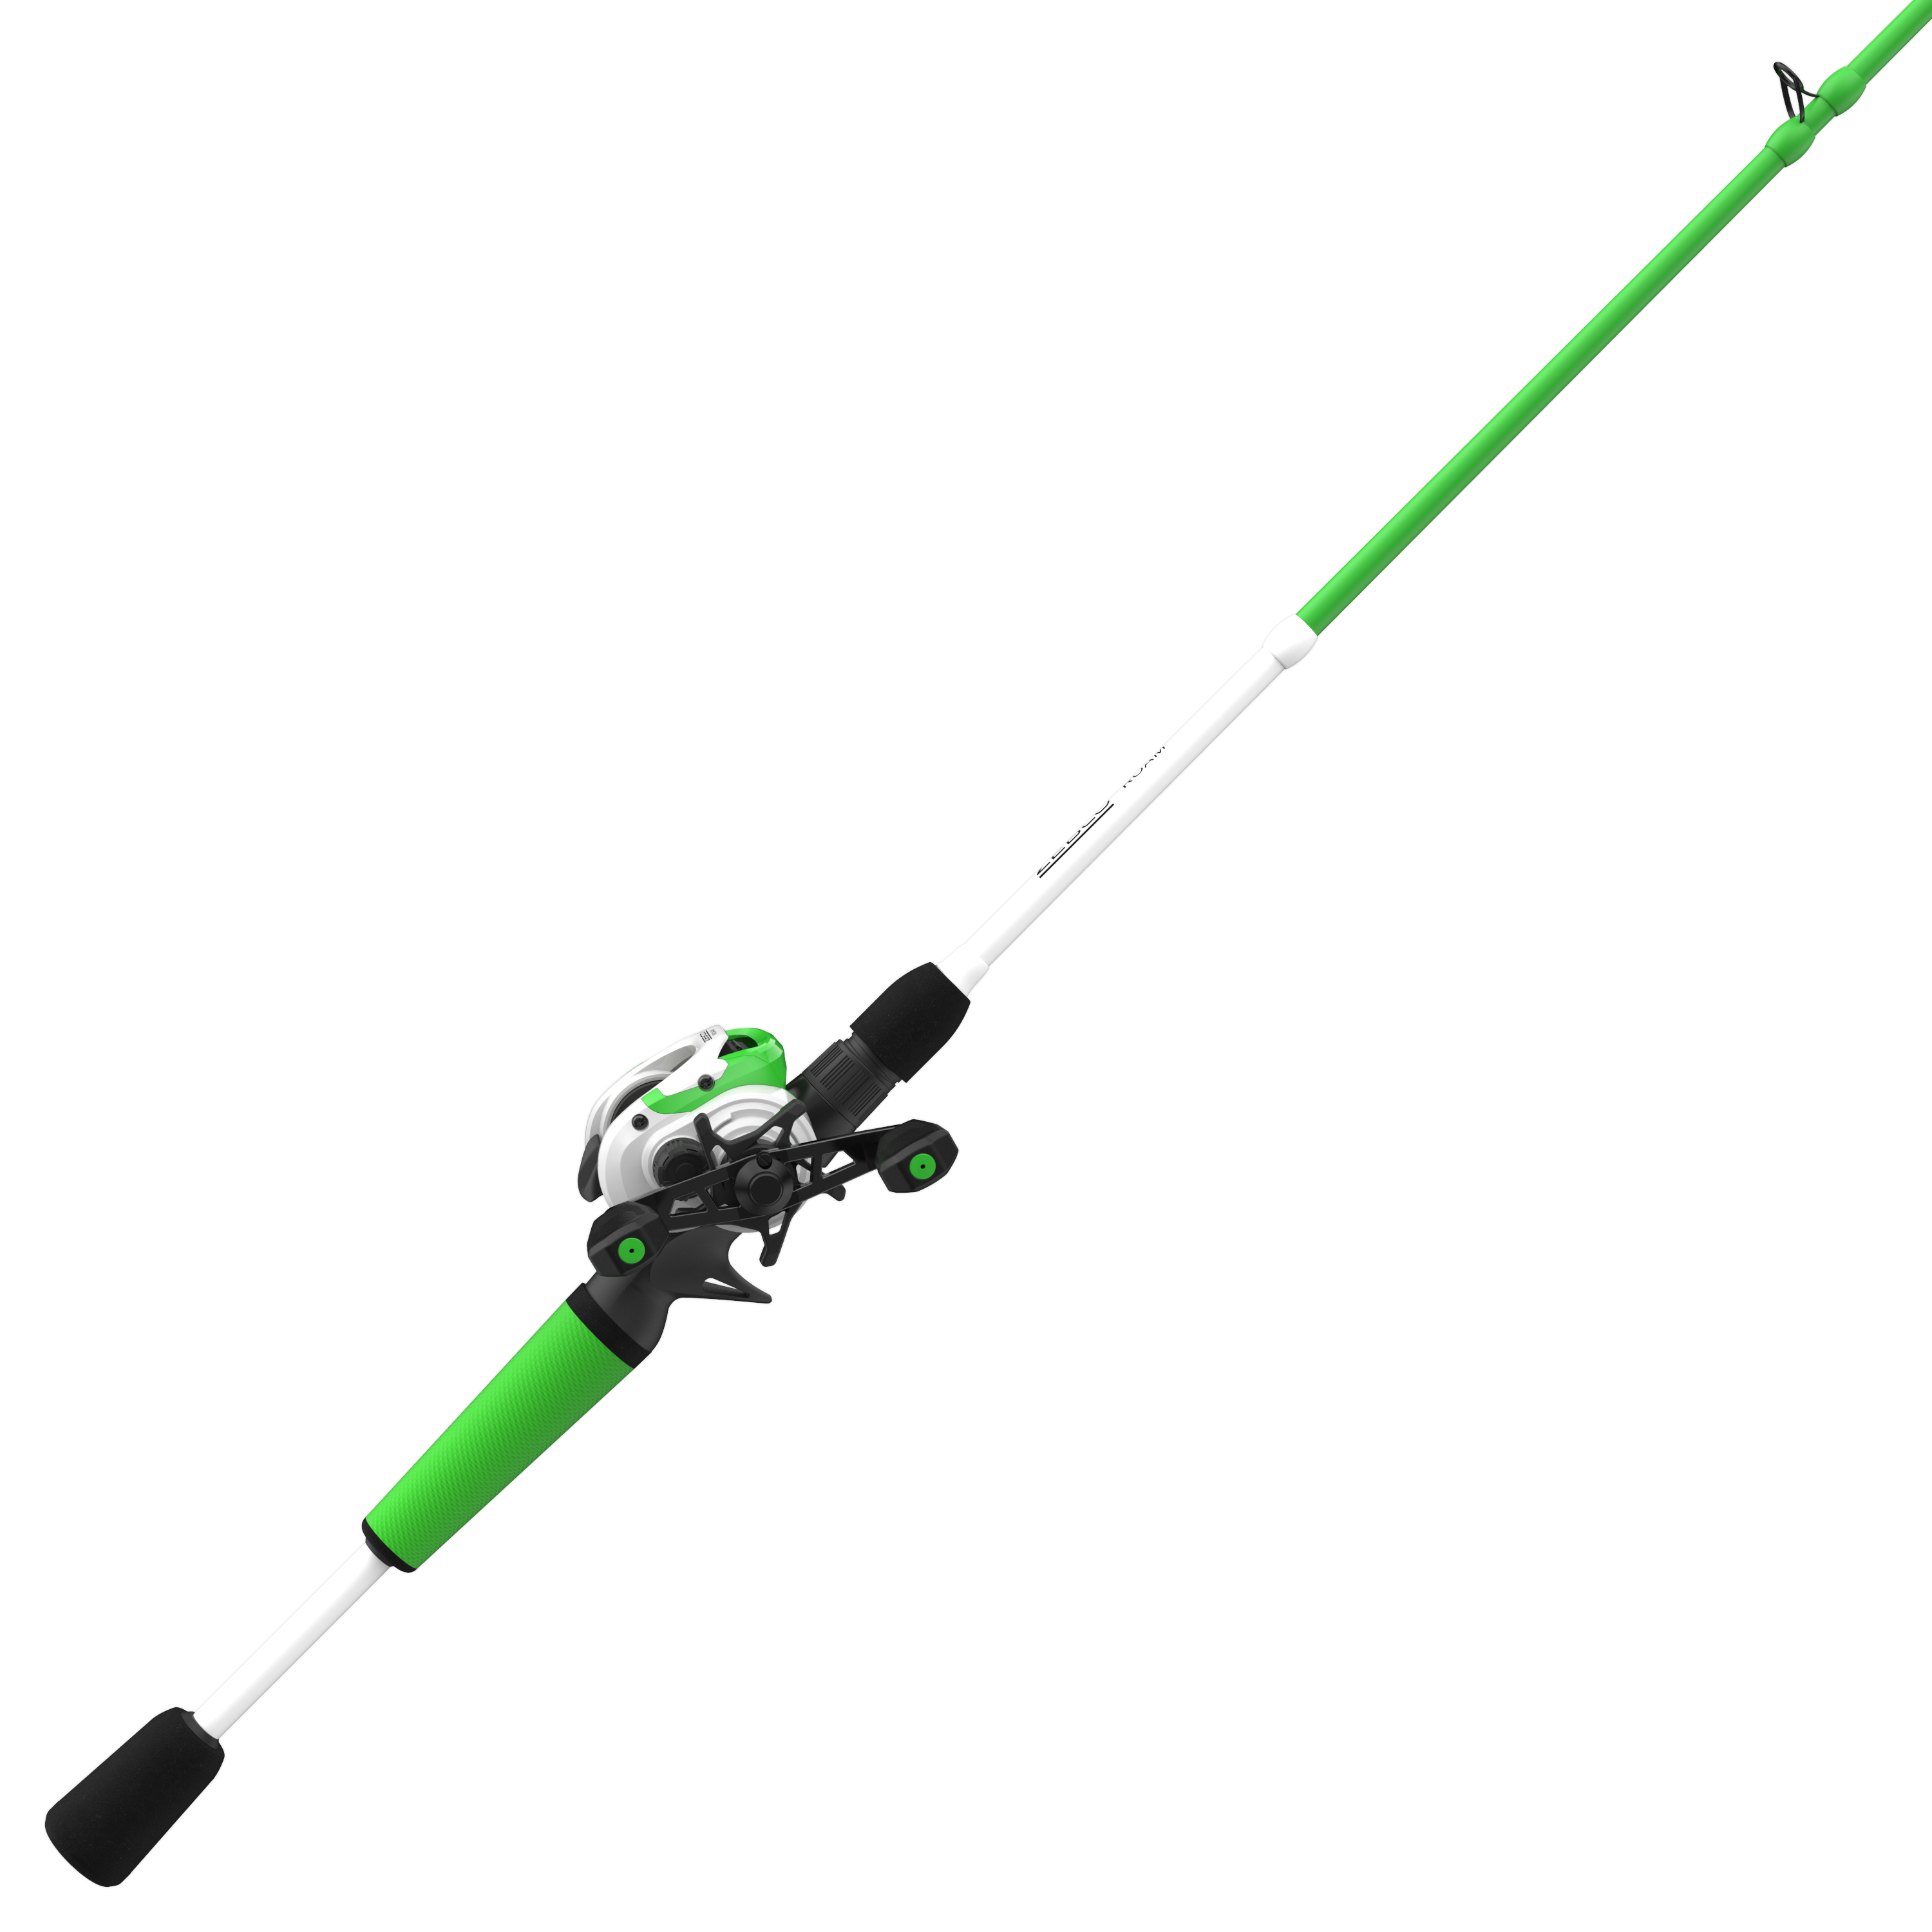  Zebco Big Cat Spincast Reel And Fishing Rod Combo, 7-Foot 2-Piece  Fishing Pole, Dial-Adjustable Magnum Drag, Pre-Spooled